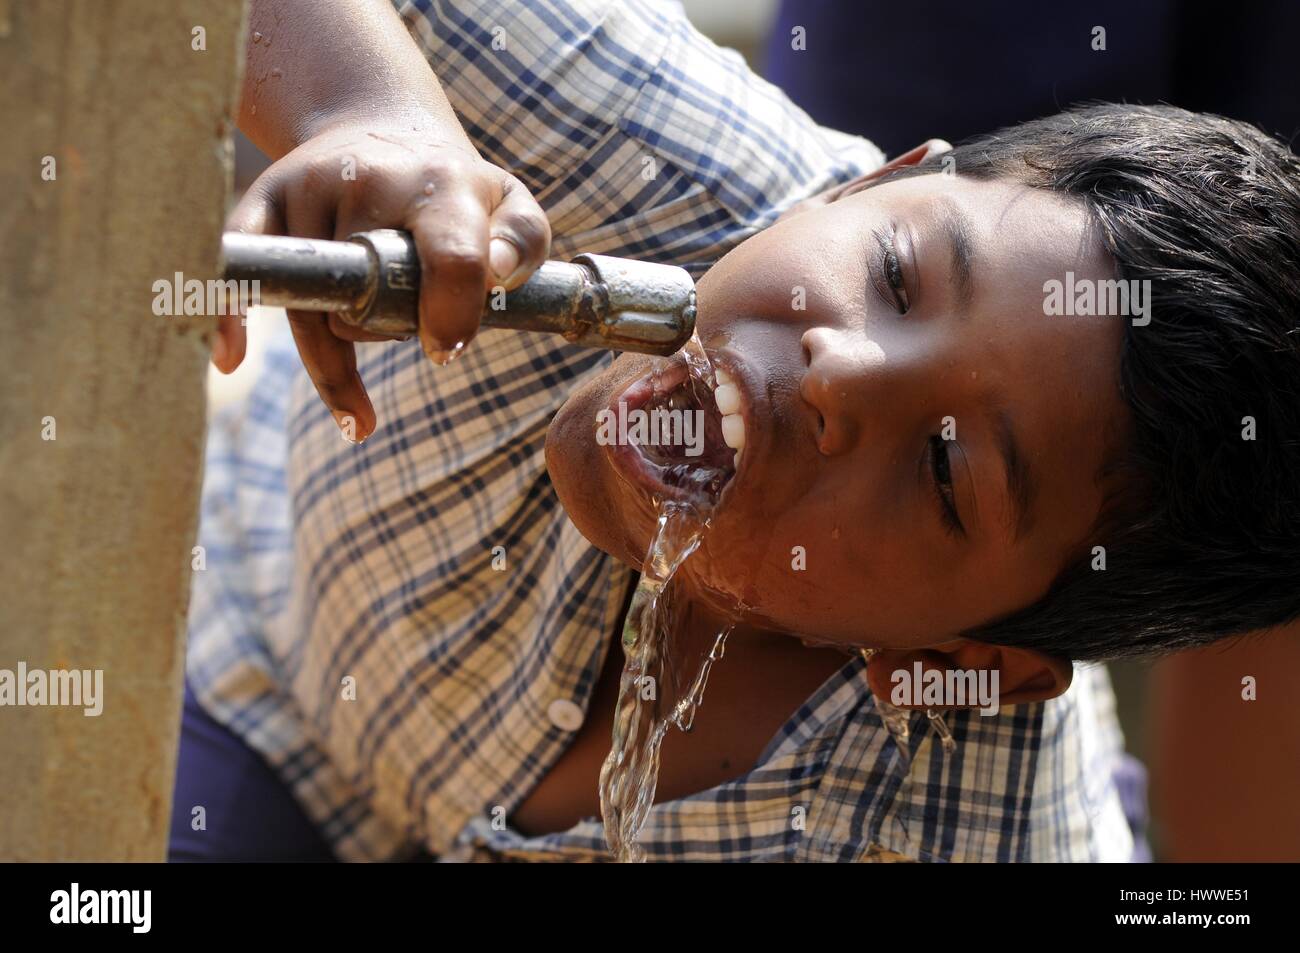 World Water Day in India -  21/03/2017  -  India / Tripura / Agartala  -  An Indian school children drinks water from a water supply line on the eve of World water day at Raimura village, on the outskirts of Agartala, the capital of northeastern state of Tripura on March 21, 2017. World Water Day is observed on March 22 every year.   -  Abhisek Saha / Le Pictorium Stock Photo